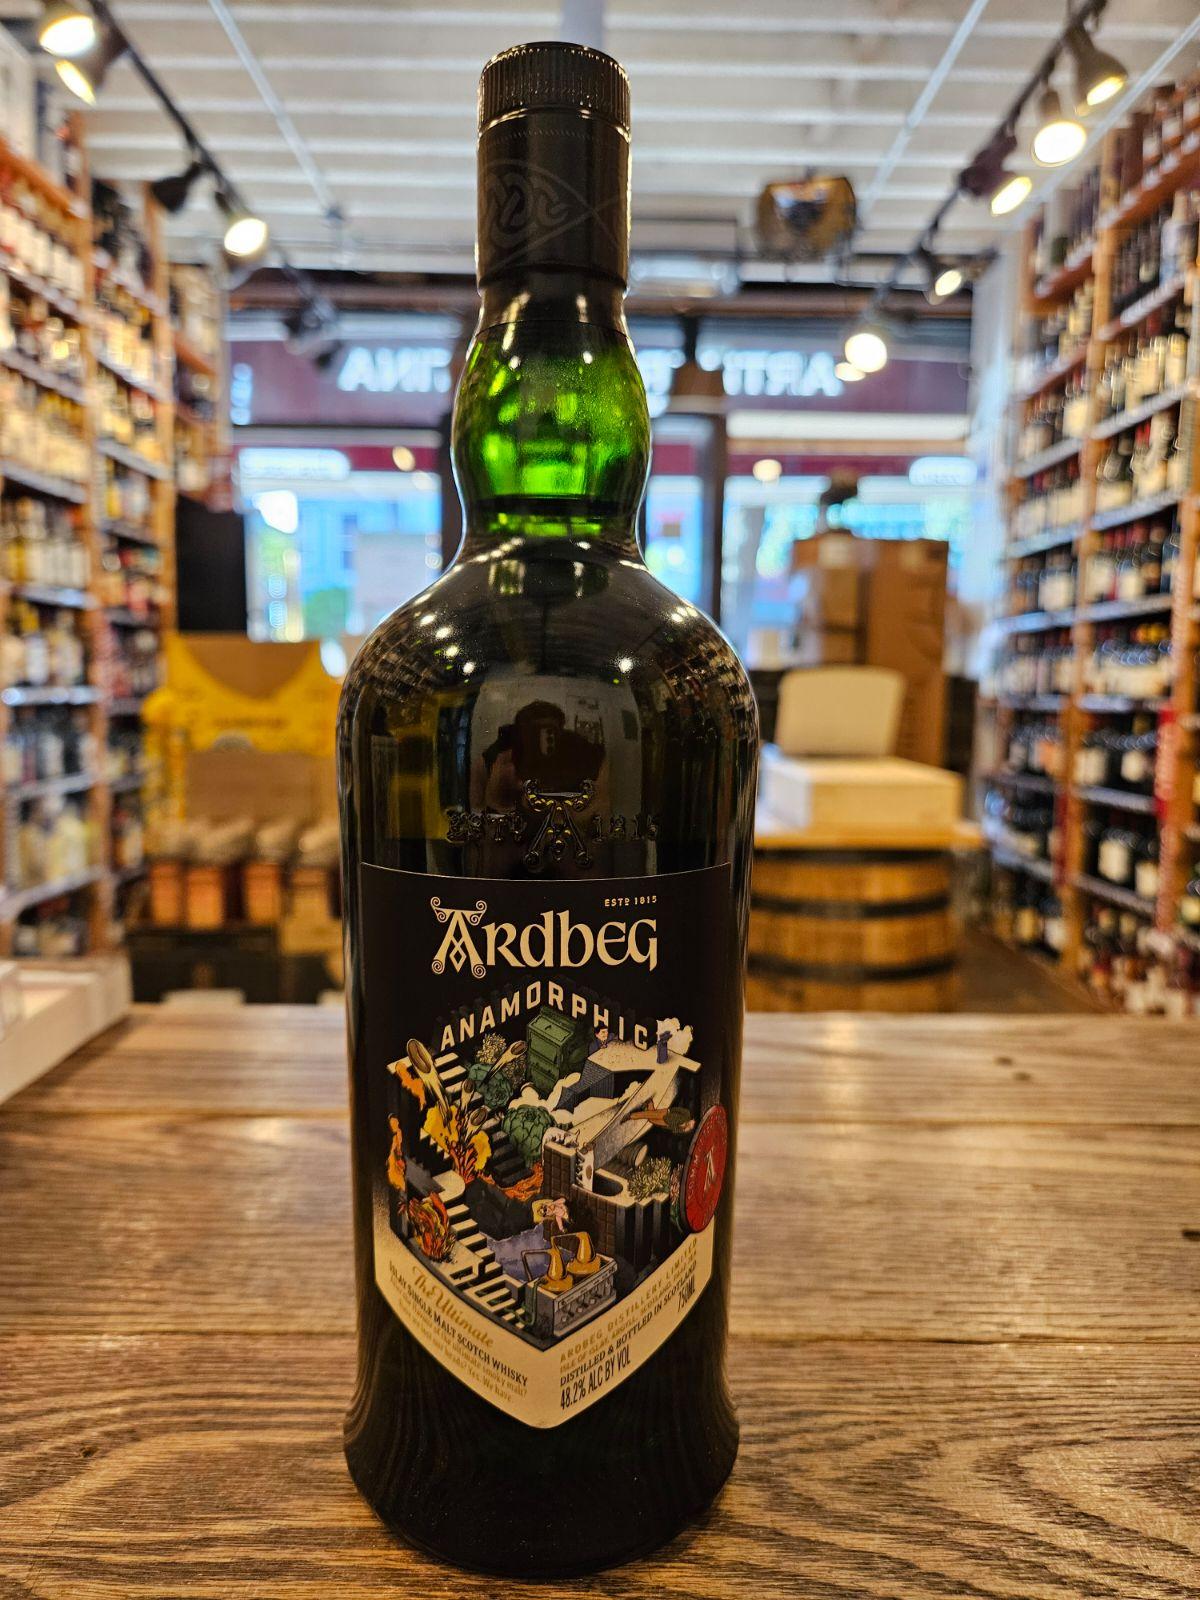 Ardbeg Anamorphic 750mL Committee Release. Dark green bottle with a black label